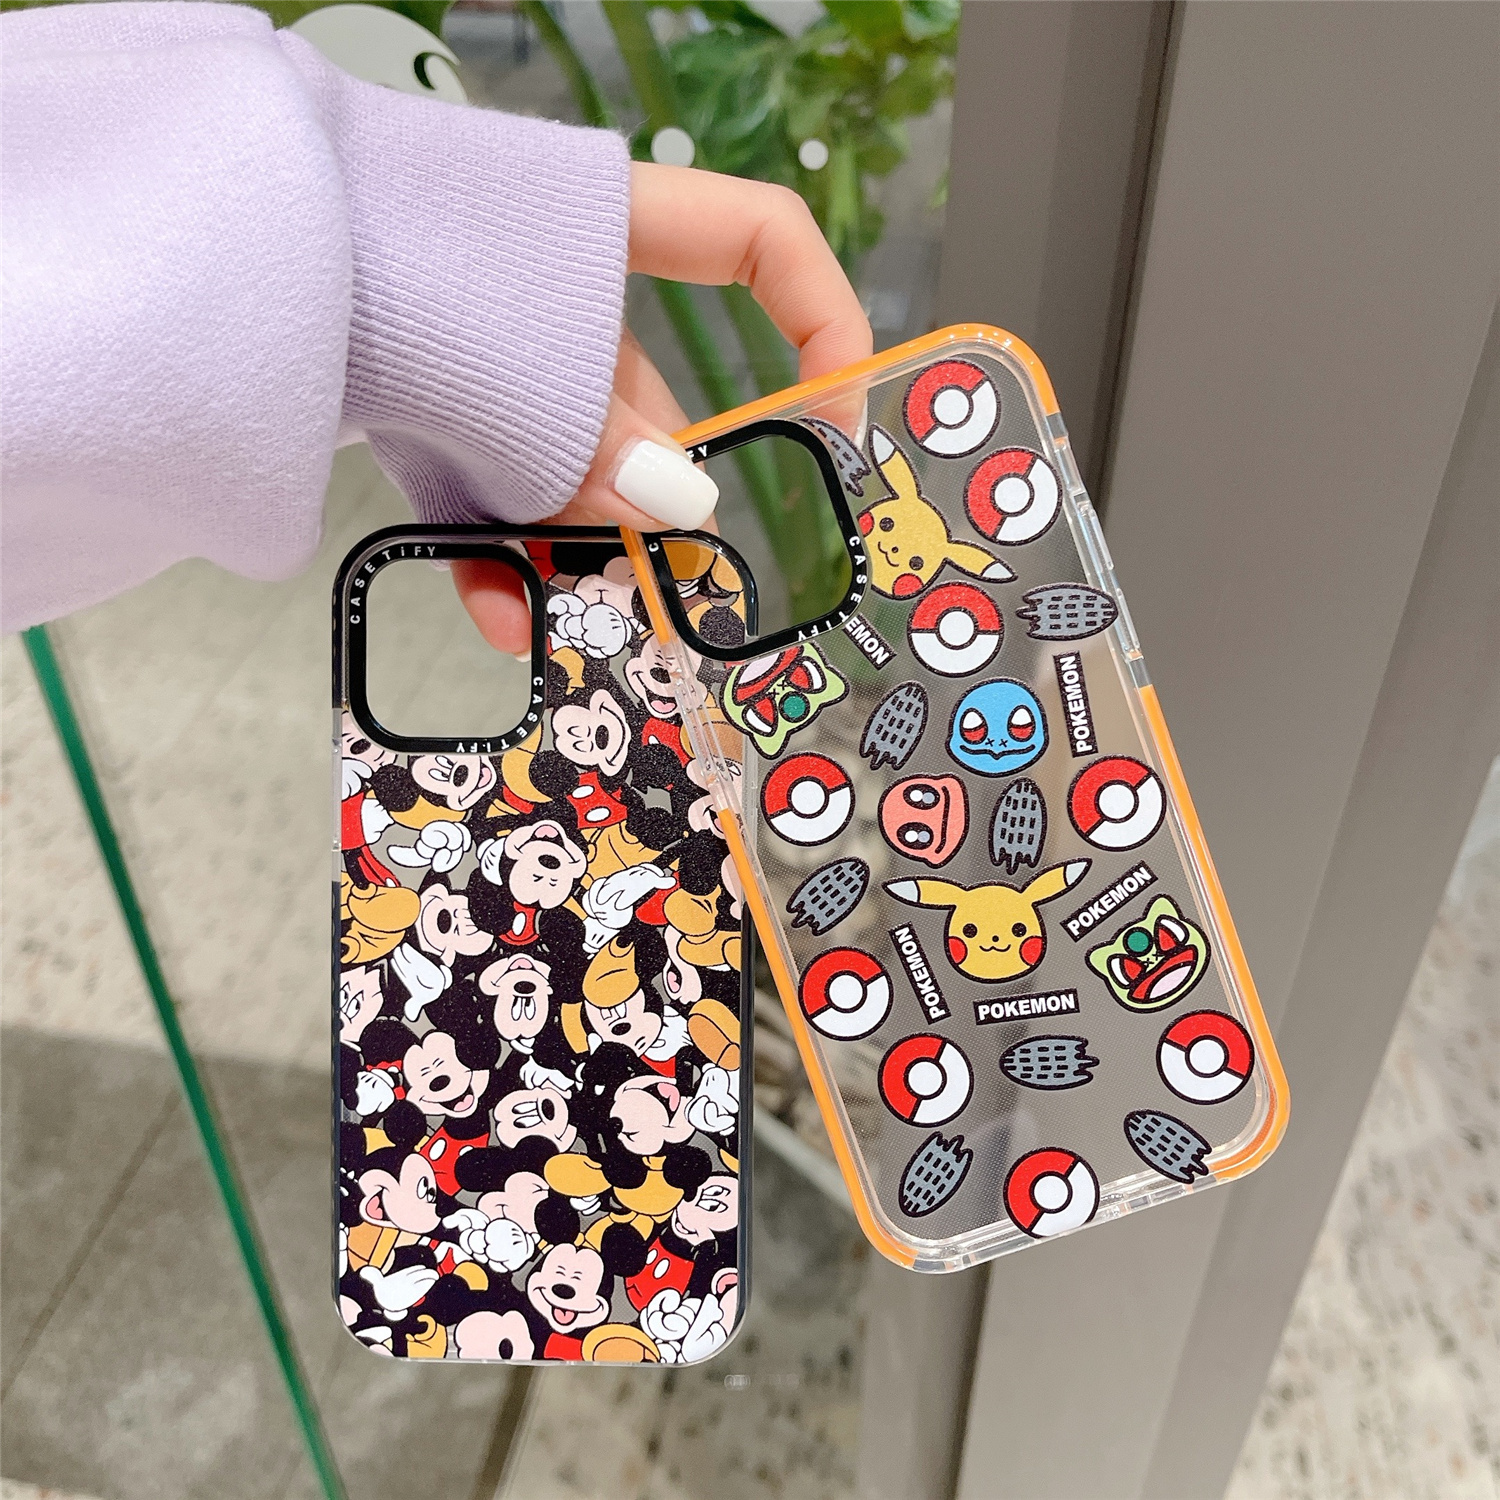 Casetify Phone Case iPhone 11 12 Pro Max 7 8 Plus SE 2020 X XS MAX XR High Quality TPU Soft Silicone Transparent Back Cover iPhone 12 Mini Cartoons Mickey Pokémon Pattern Casing